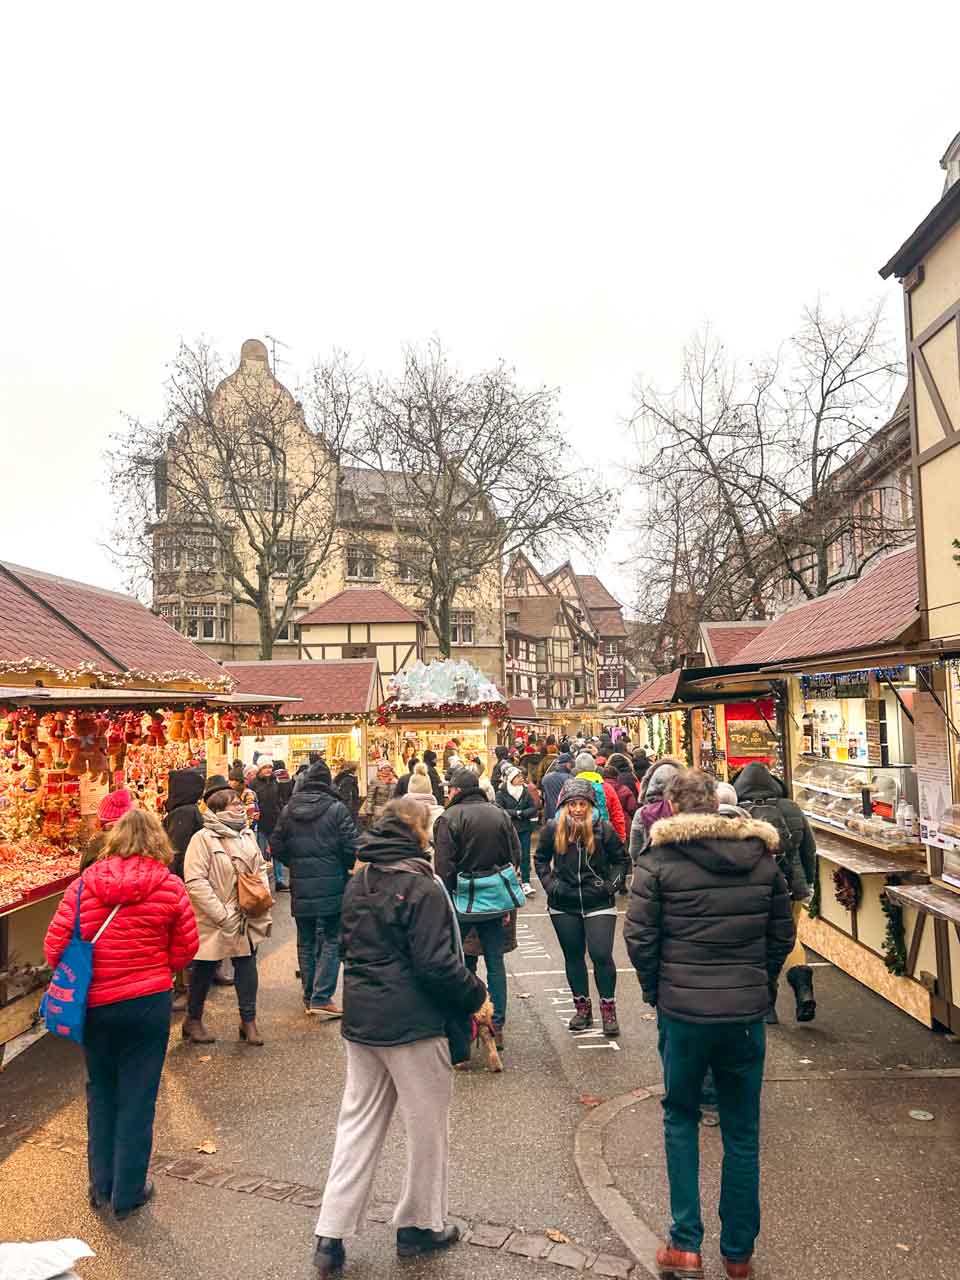 Visitors browsing through the bustling Colmar Christmas Markets, with wooden stalls and historic half-timbered houses in the background